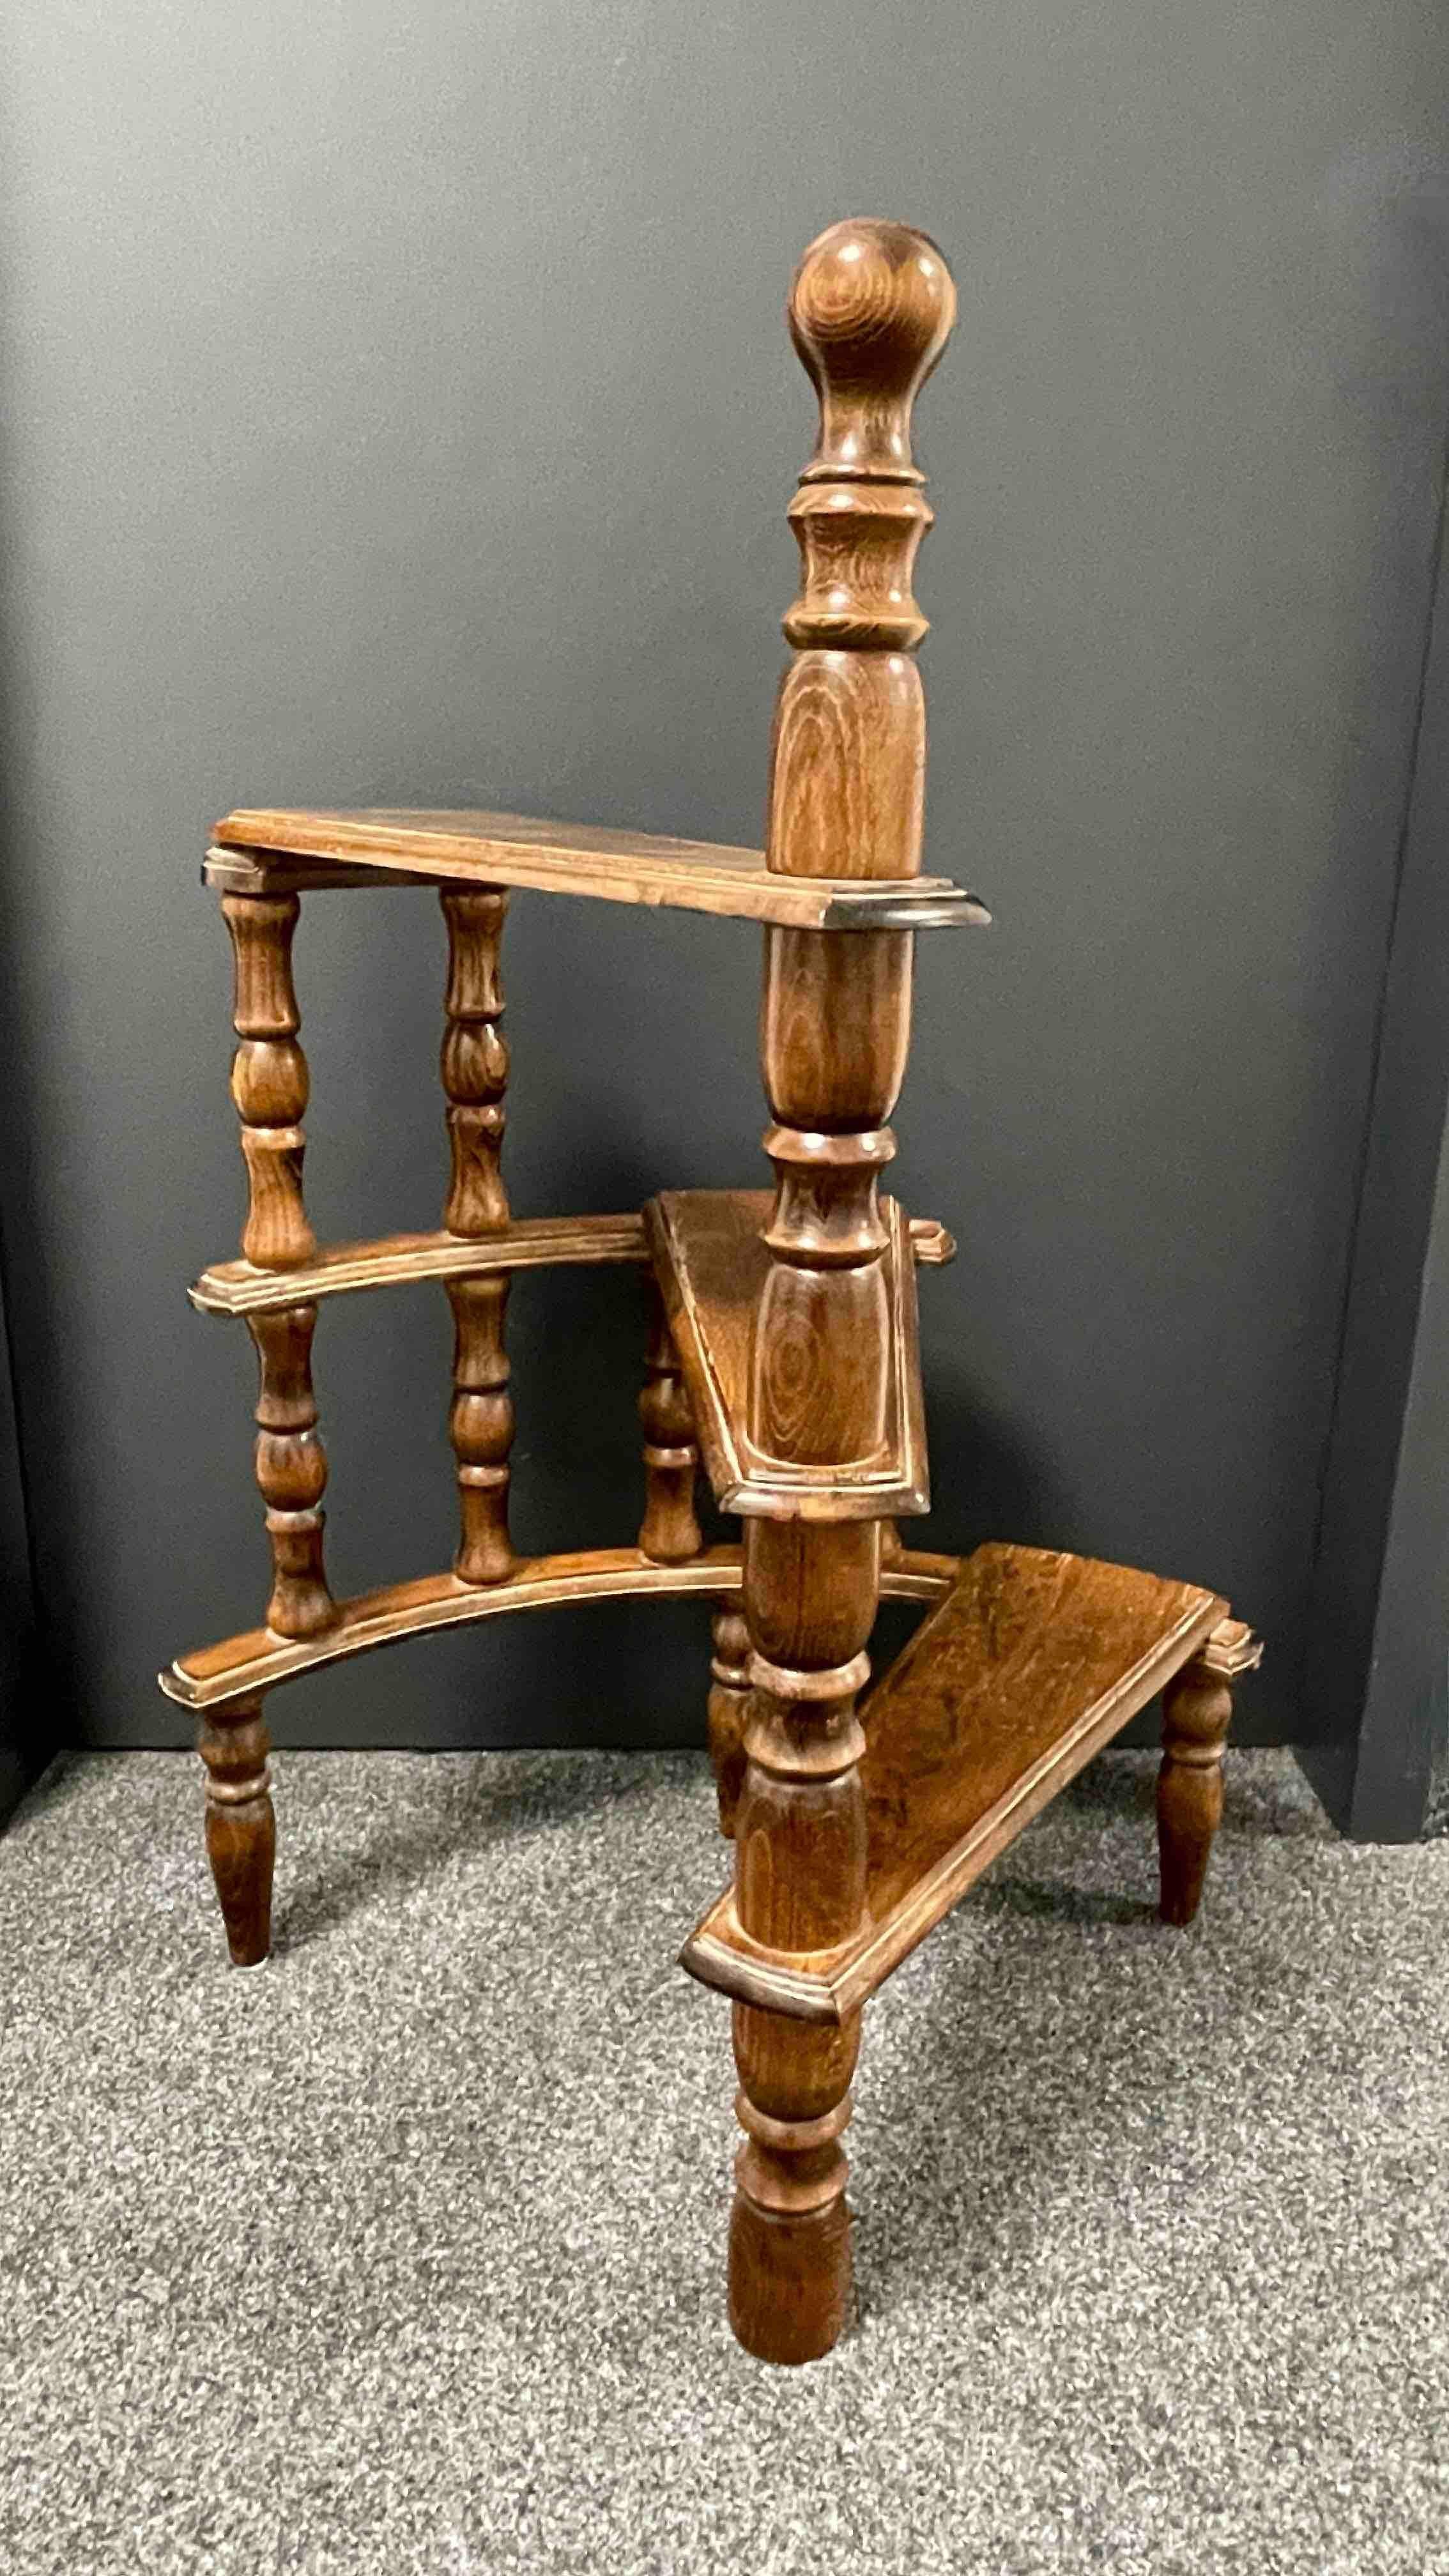 Hand-Carved Mid-20th Century German Carved Wood Spiral Step Library Ladder